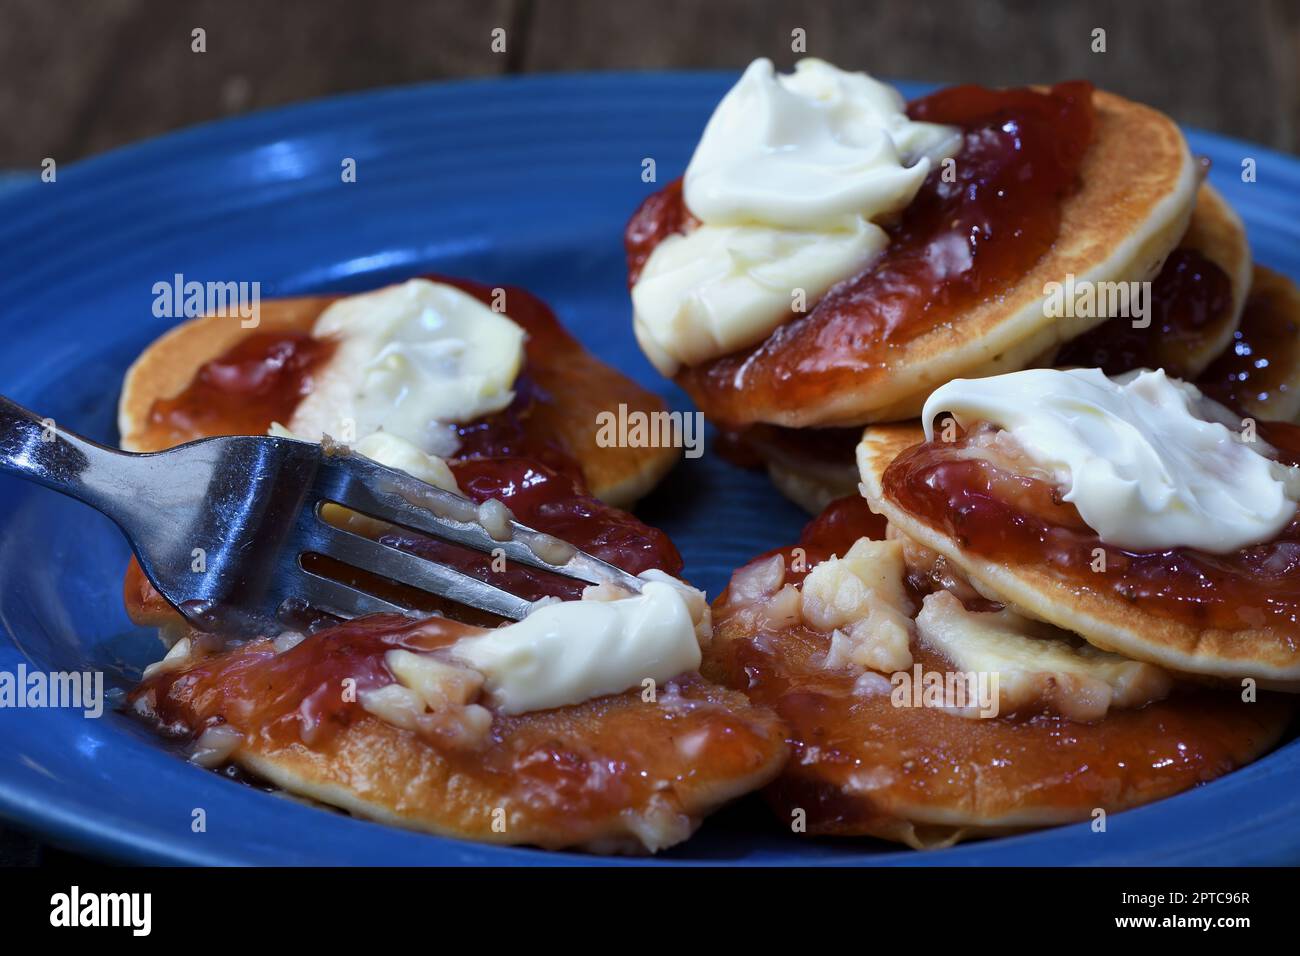 A close-up of a fork cutting into a messy plateful of pikelets/pancakes to illustrate an overindulgent eating frenzy of sweet, fatty desserts Stock Photo